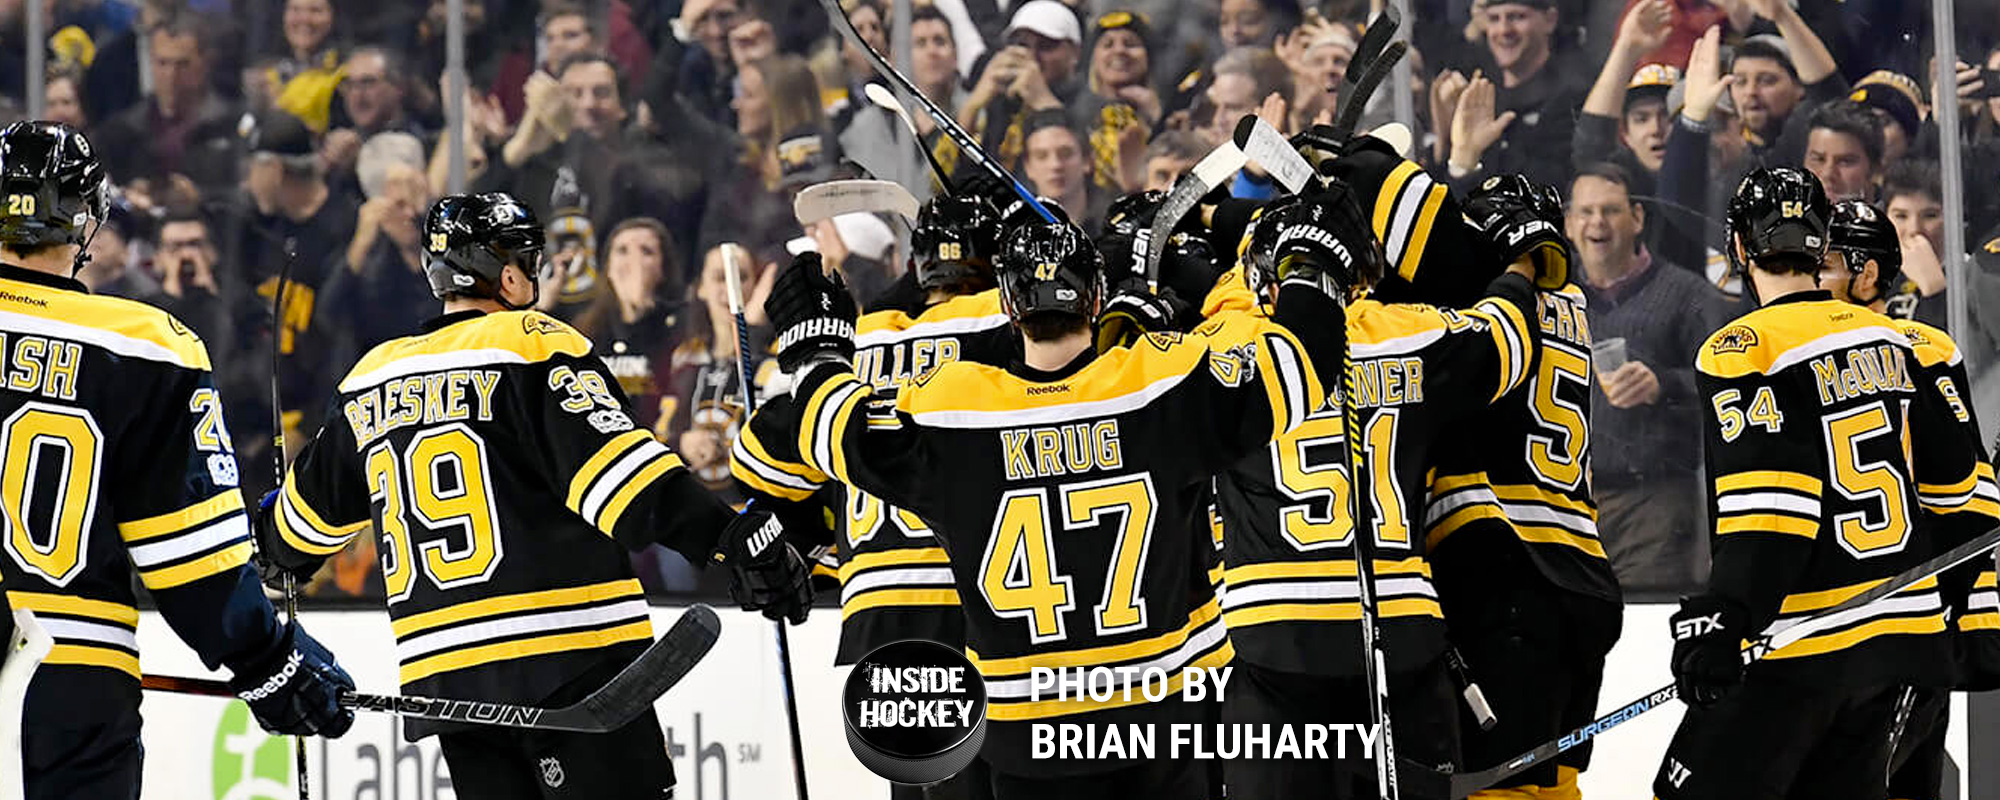 Bruins Double Up Hurricanes 4-2